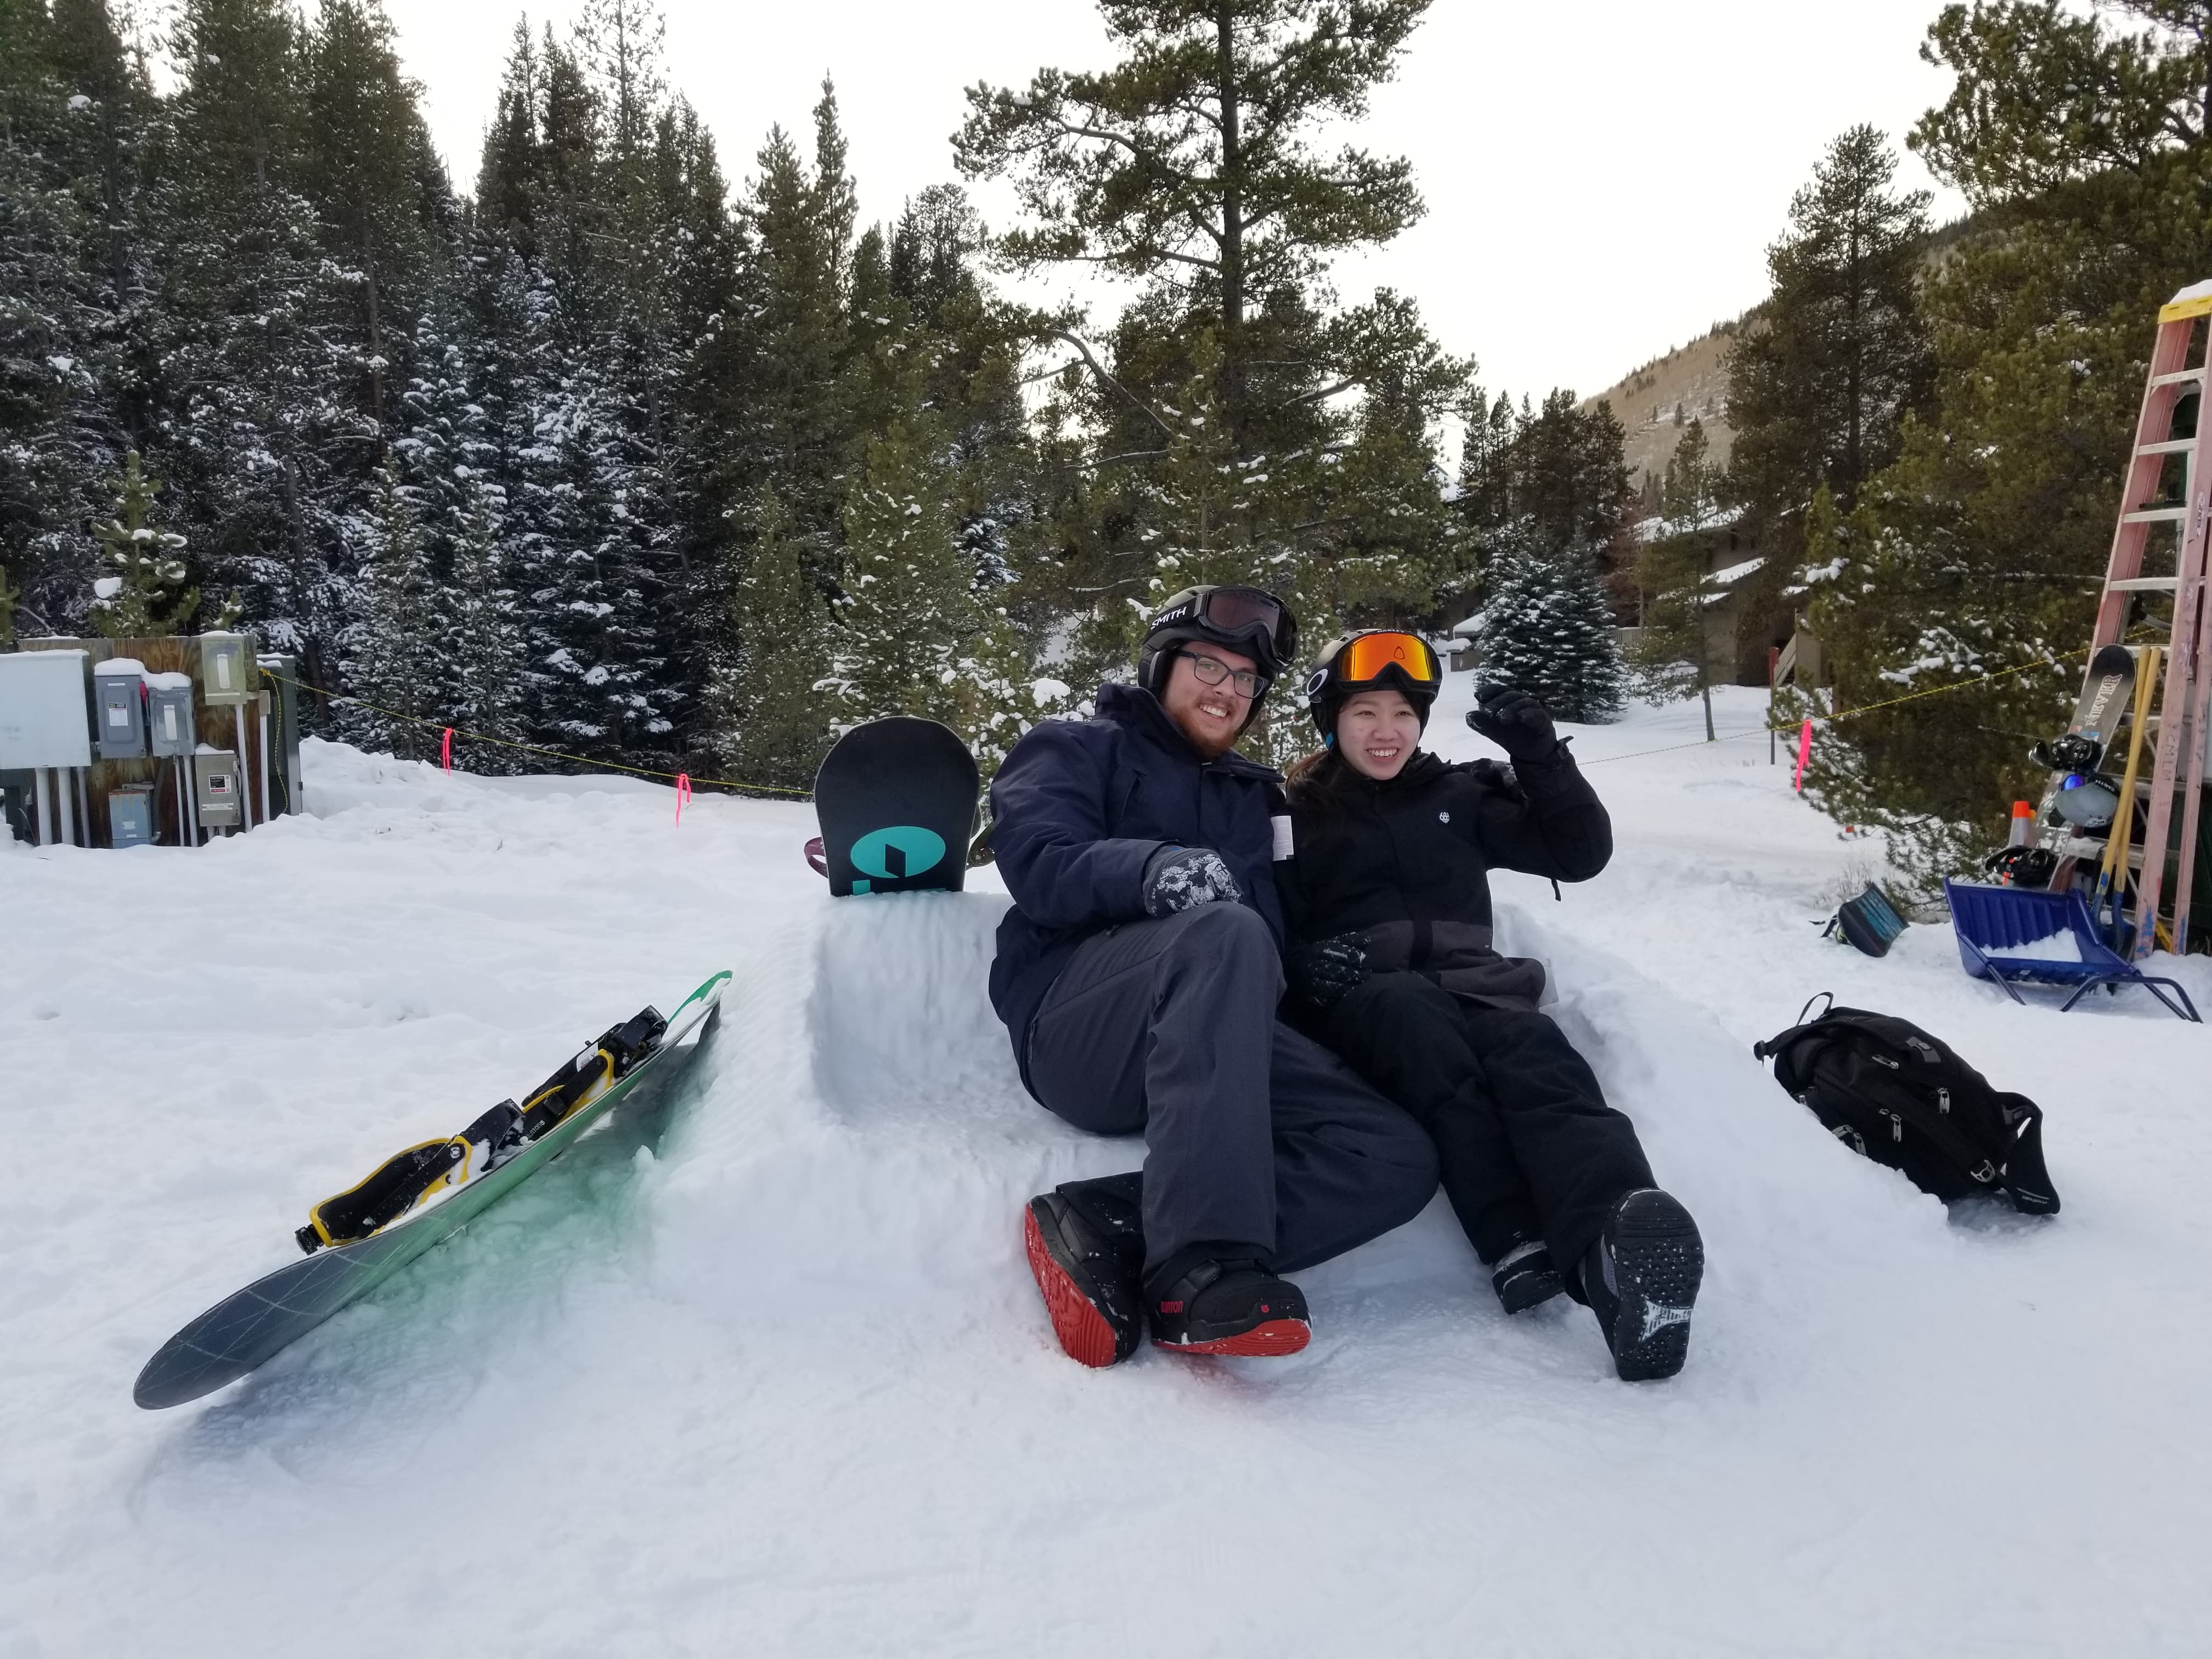 Two people sitting on a snow couch